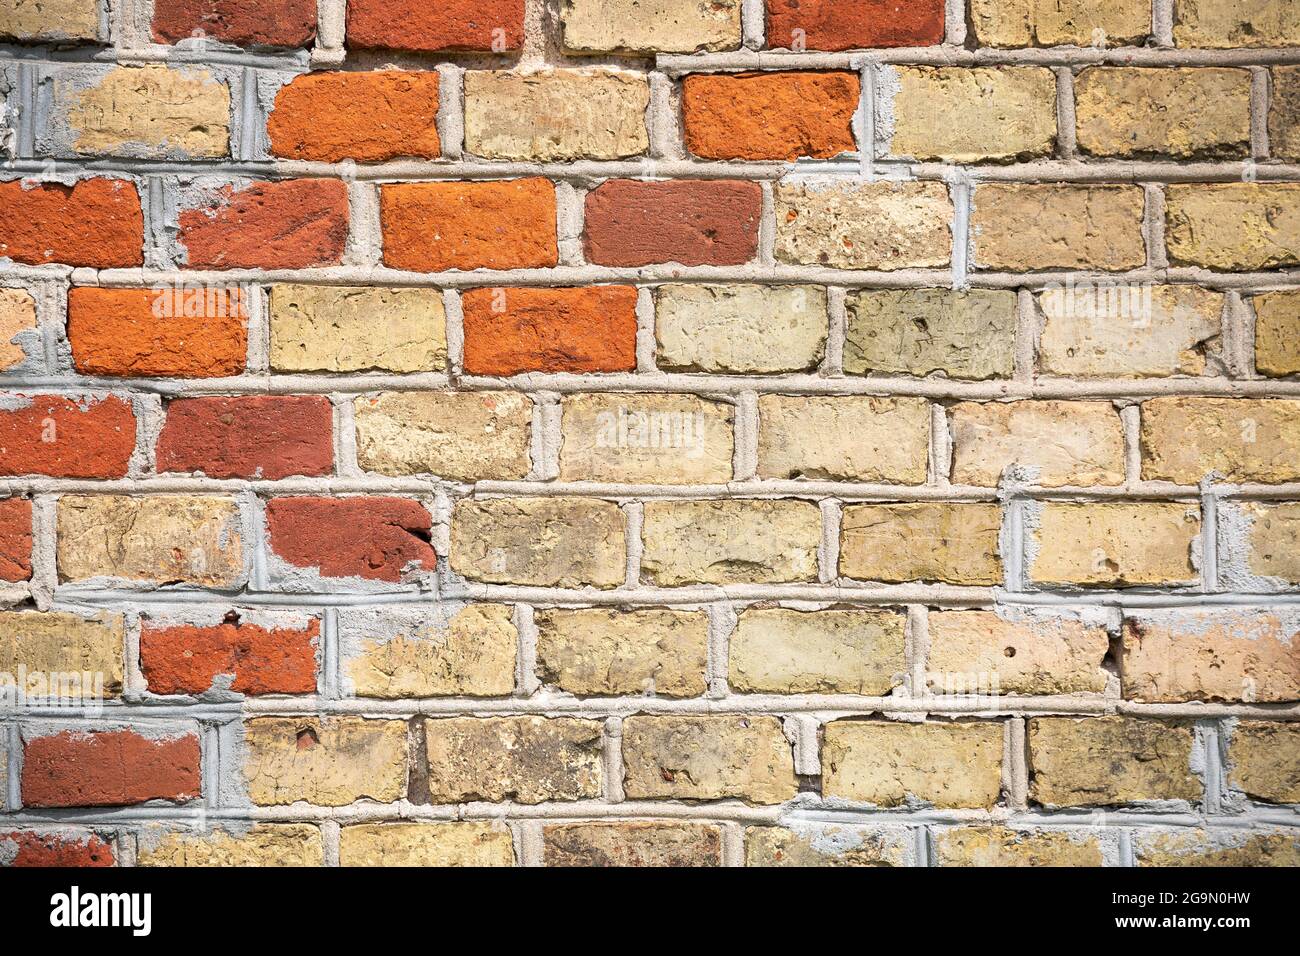 Wall made of old bricks as a background Stock Photo